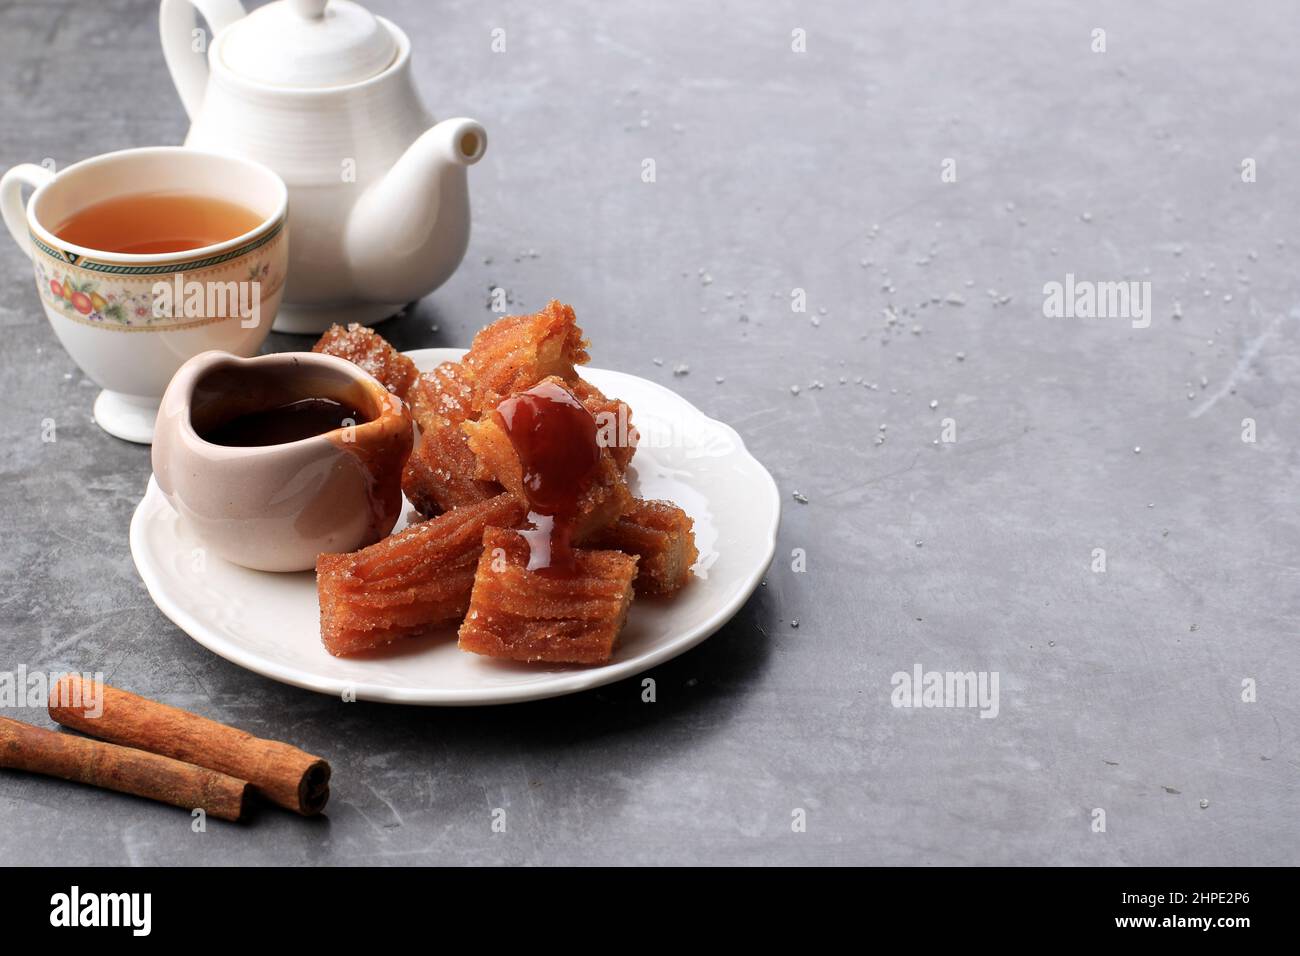 Homemade Mini Churros with Dulce de Leche, Served with Tea. Copy Space for Text Stock Photo